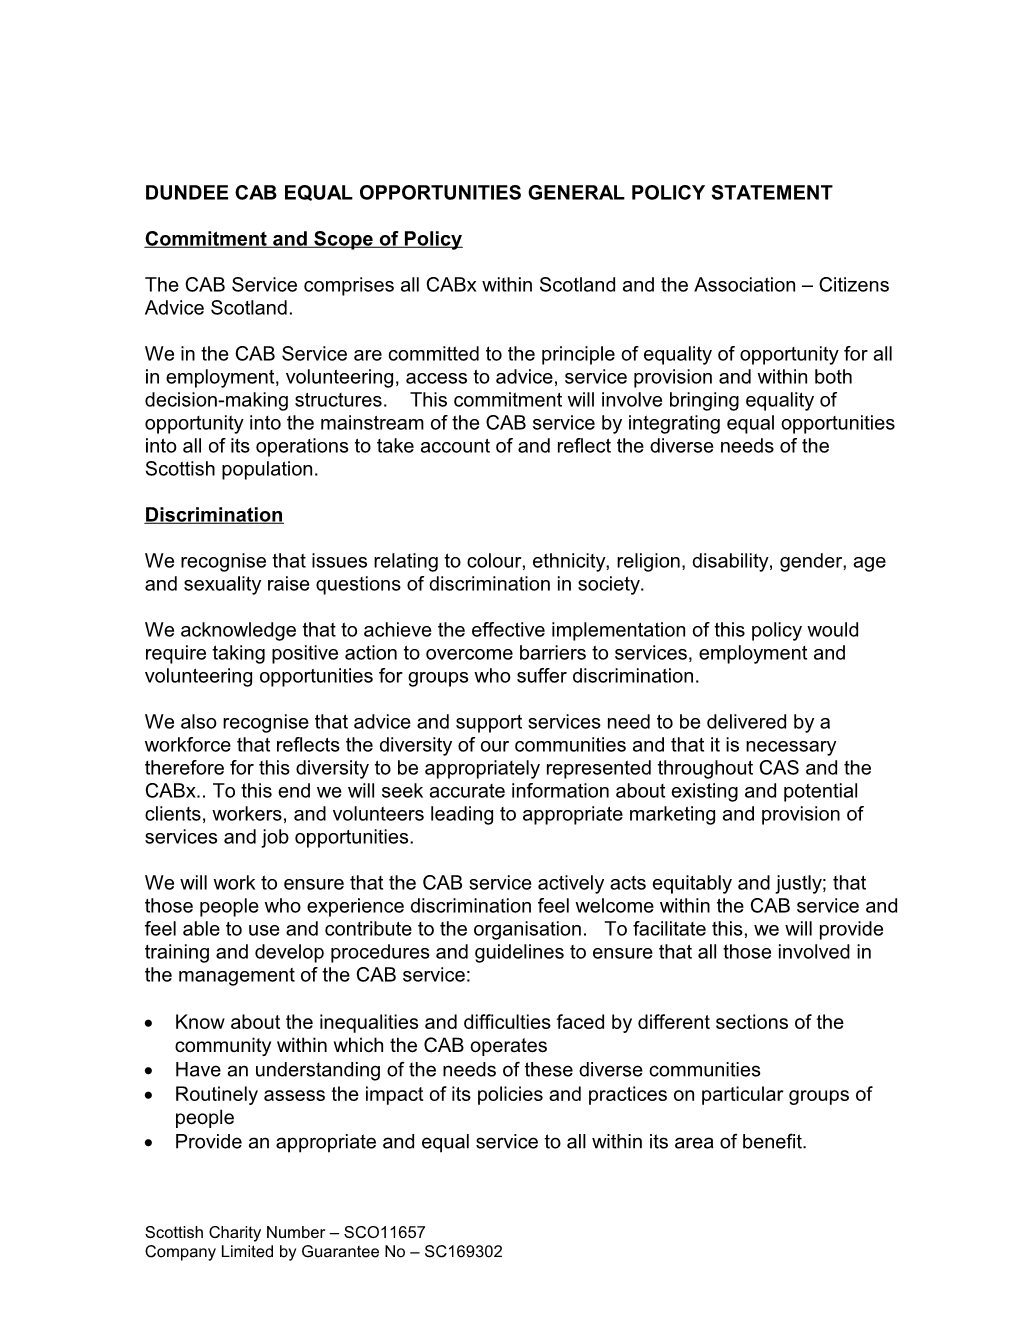 Dundee Cab Equal Opportunities General Policy Statement